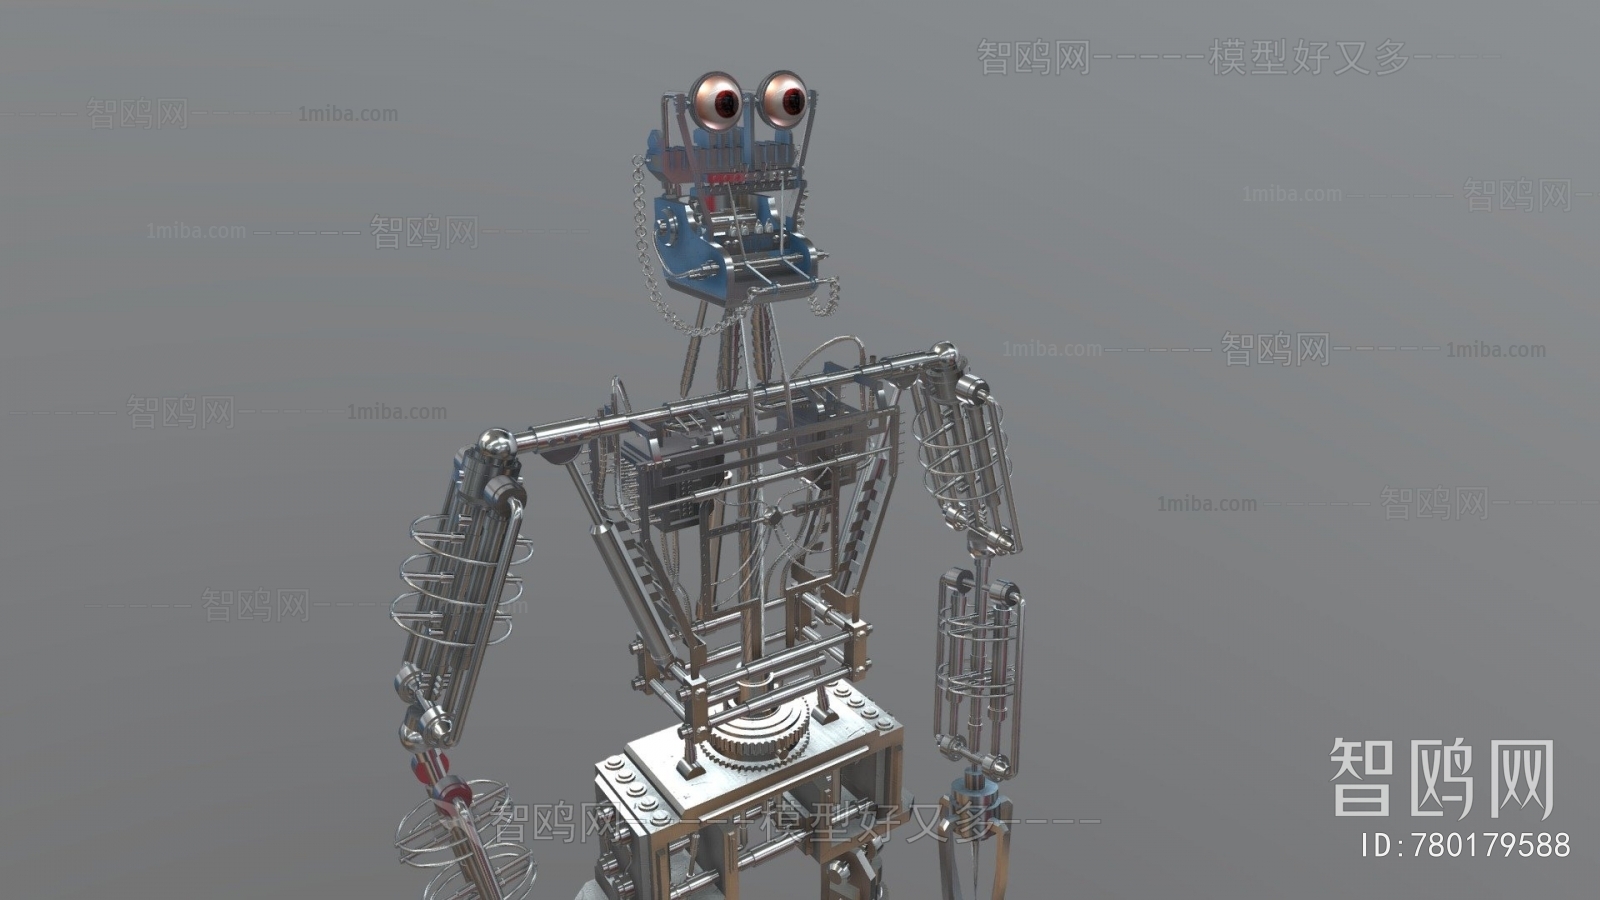 Industrial Style Robot